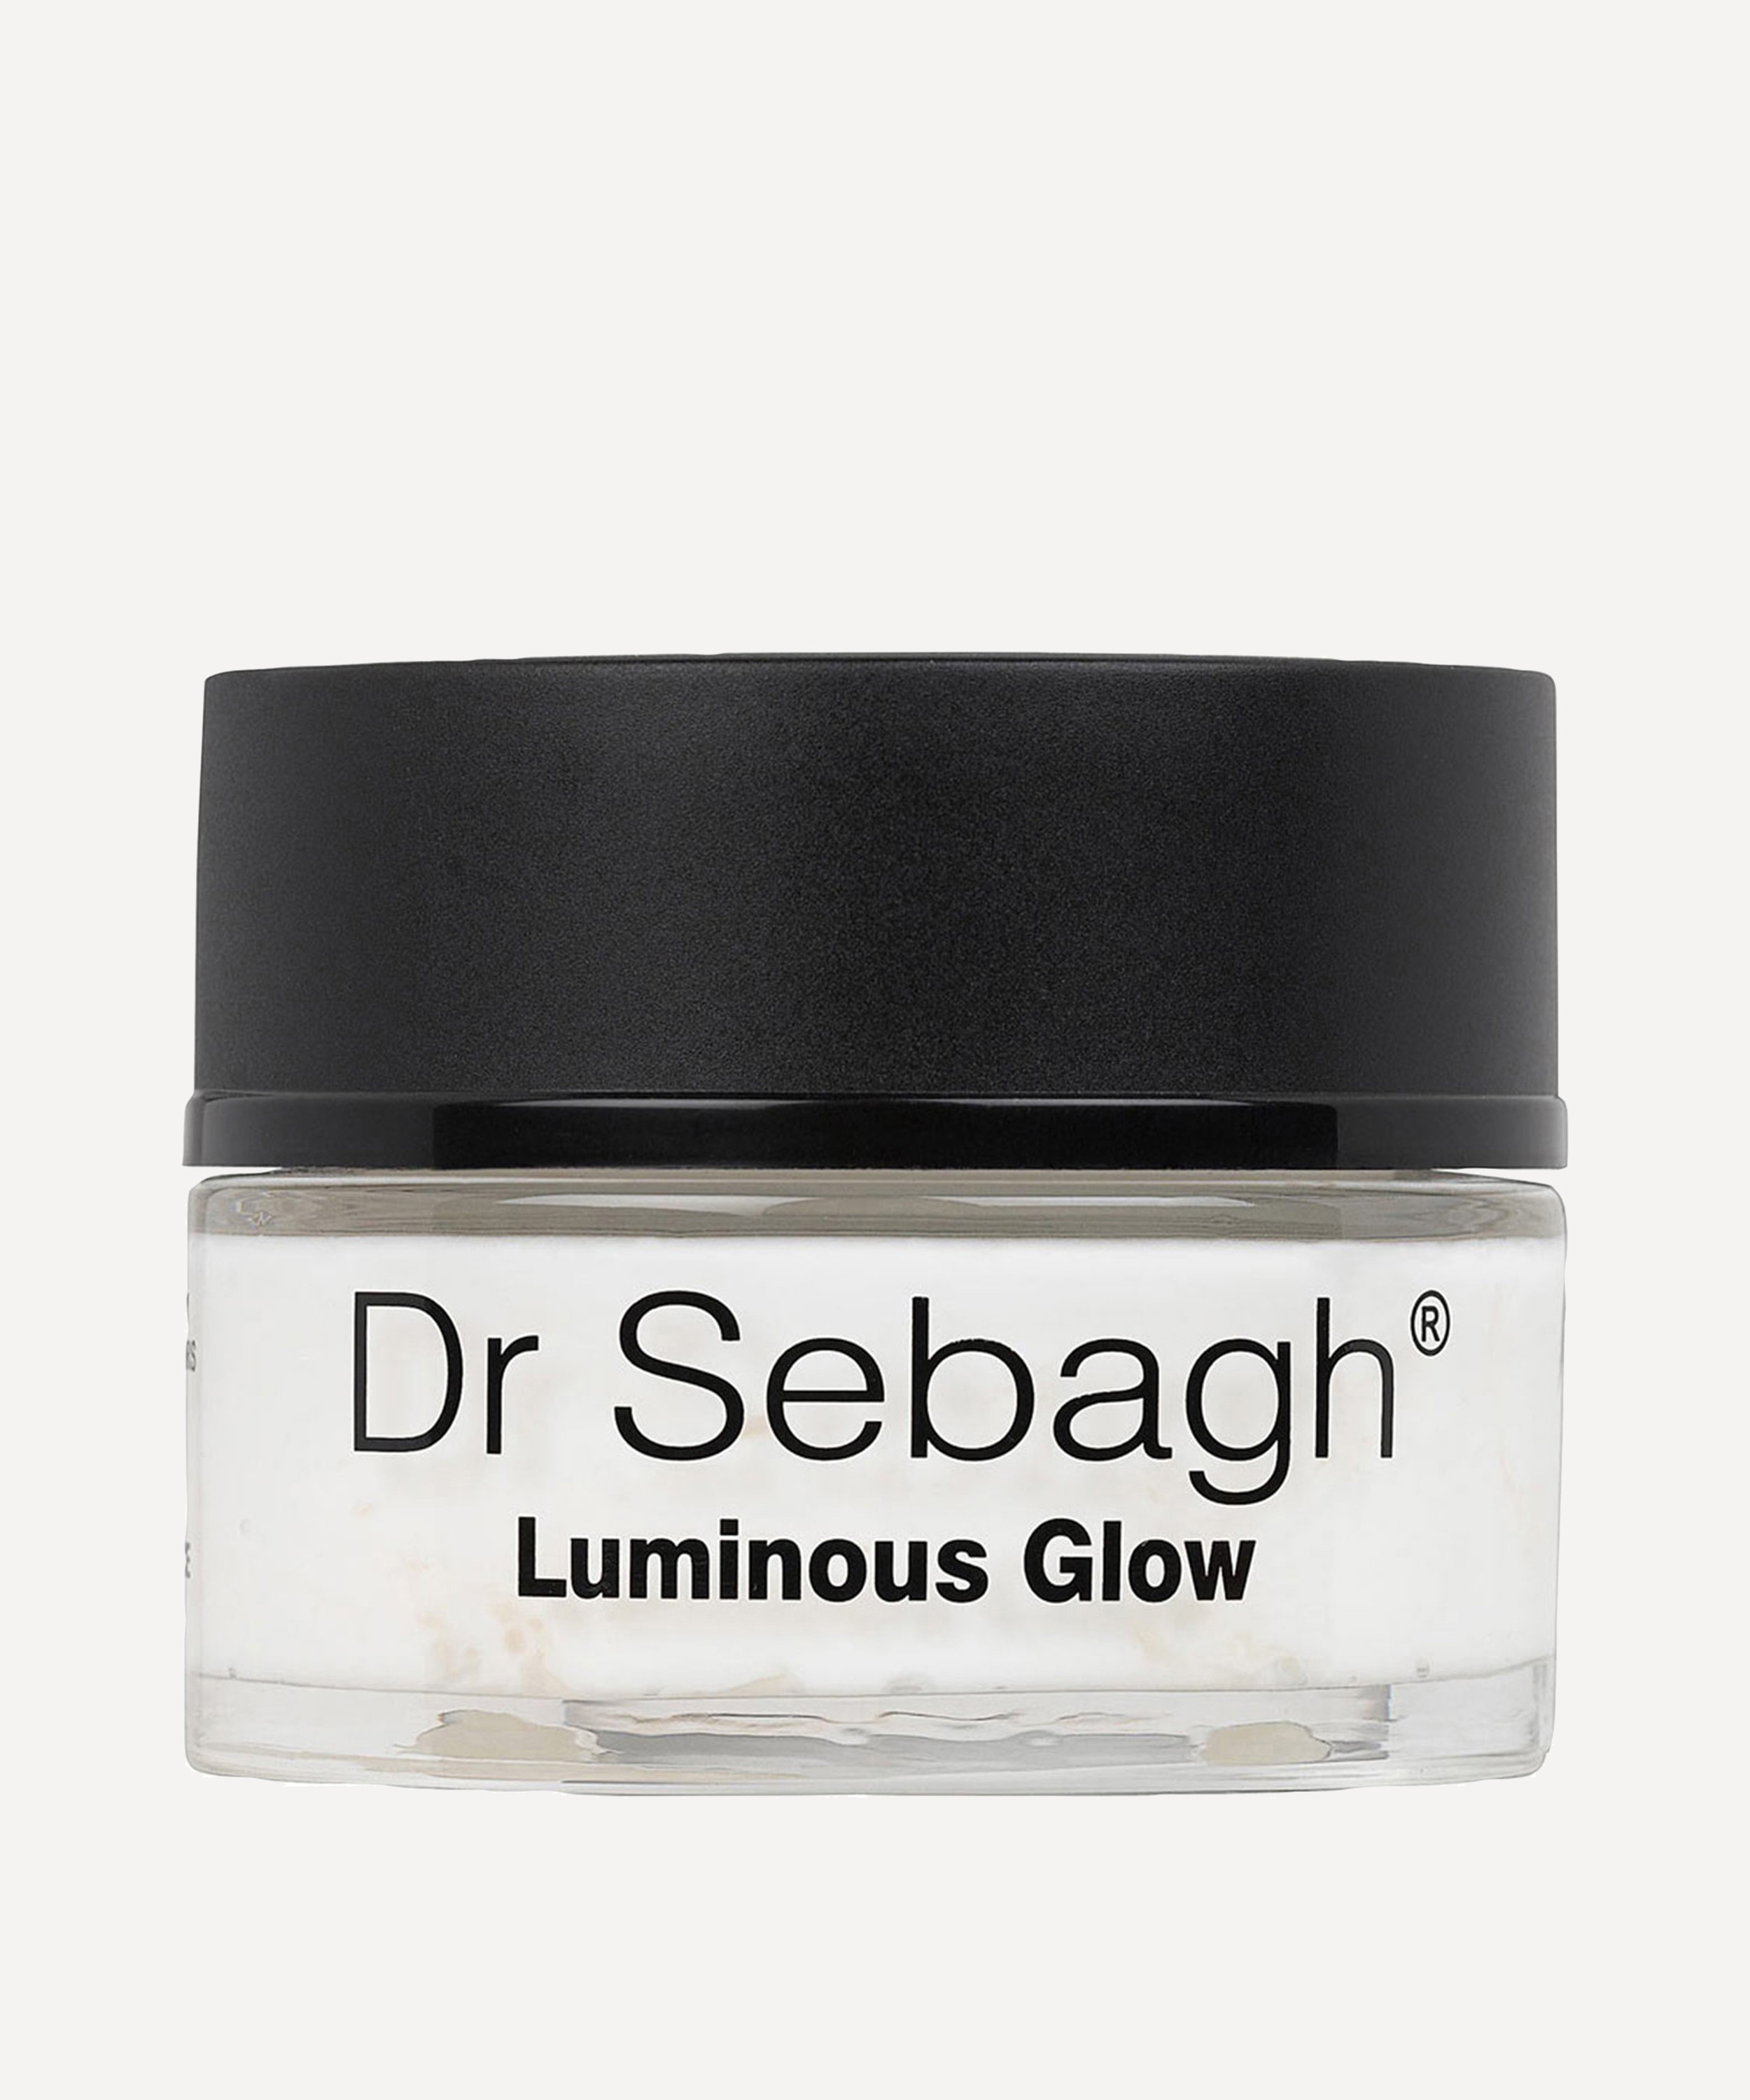 Dr Sebagh - Luminous Glow Complexion Perfector image number 0